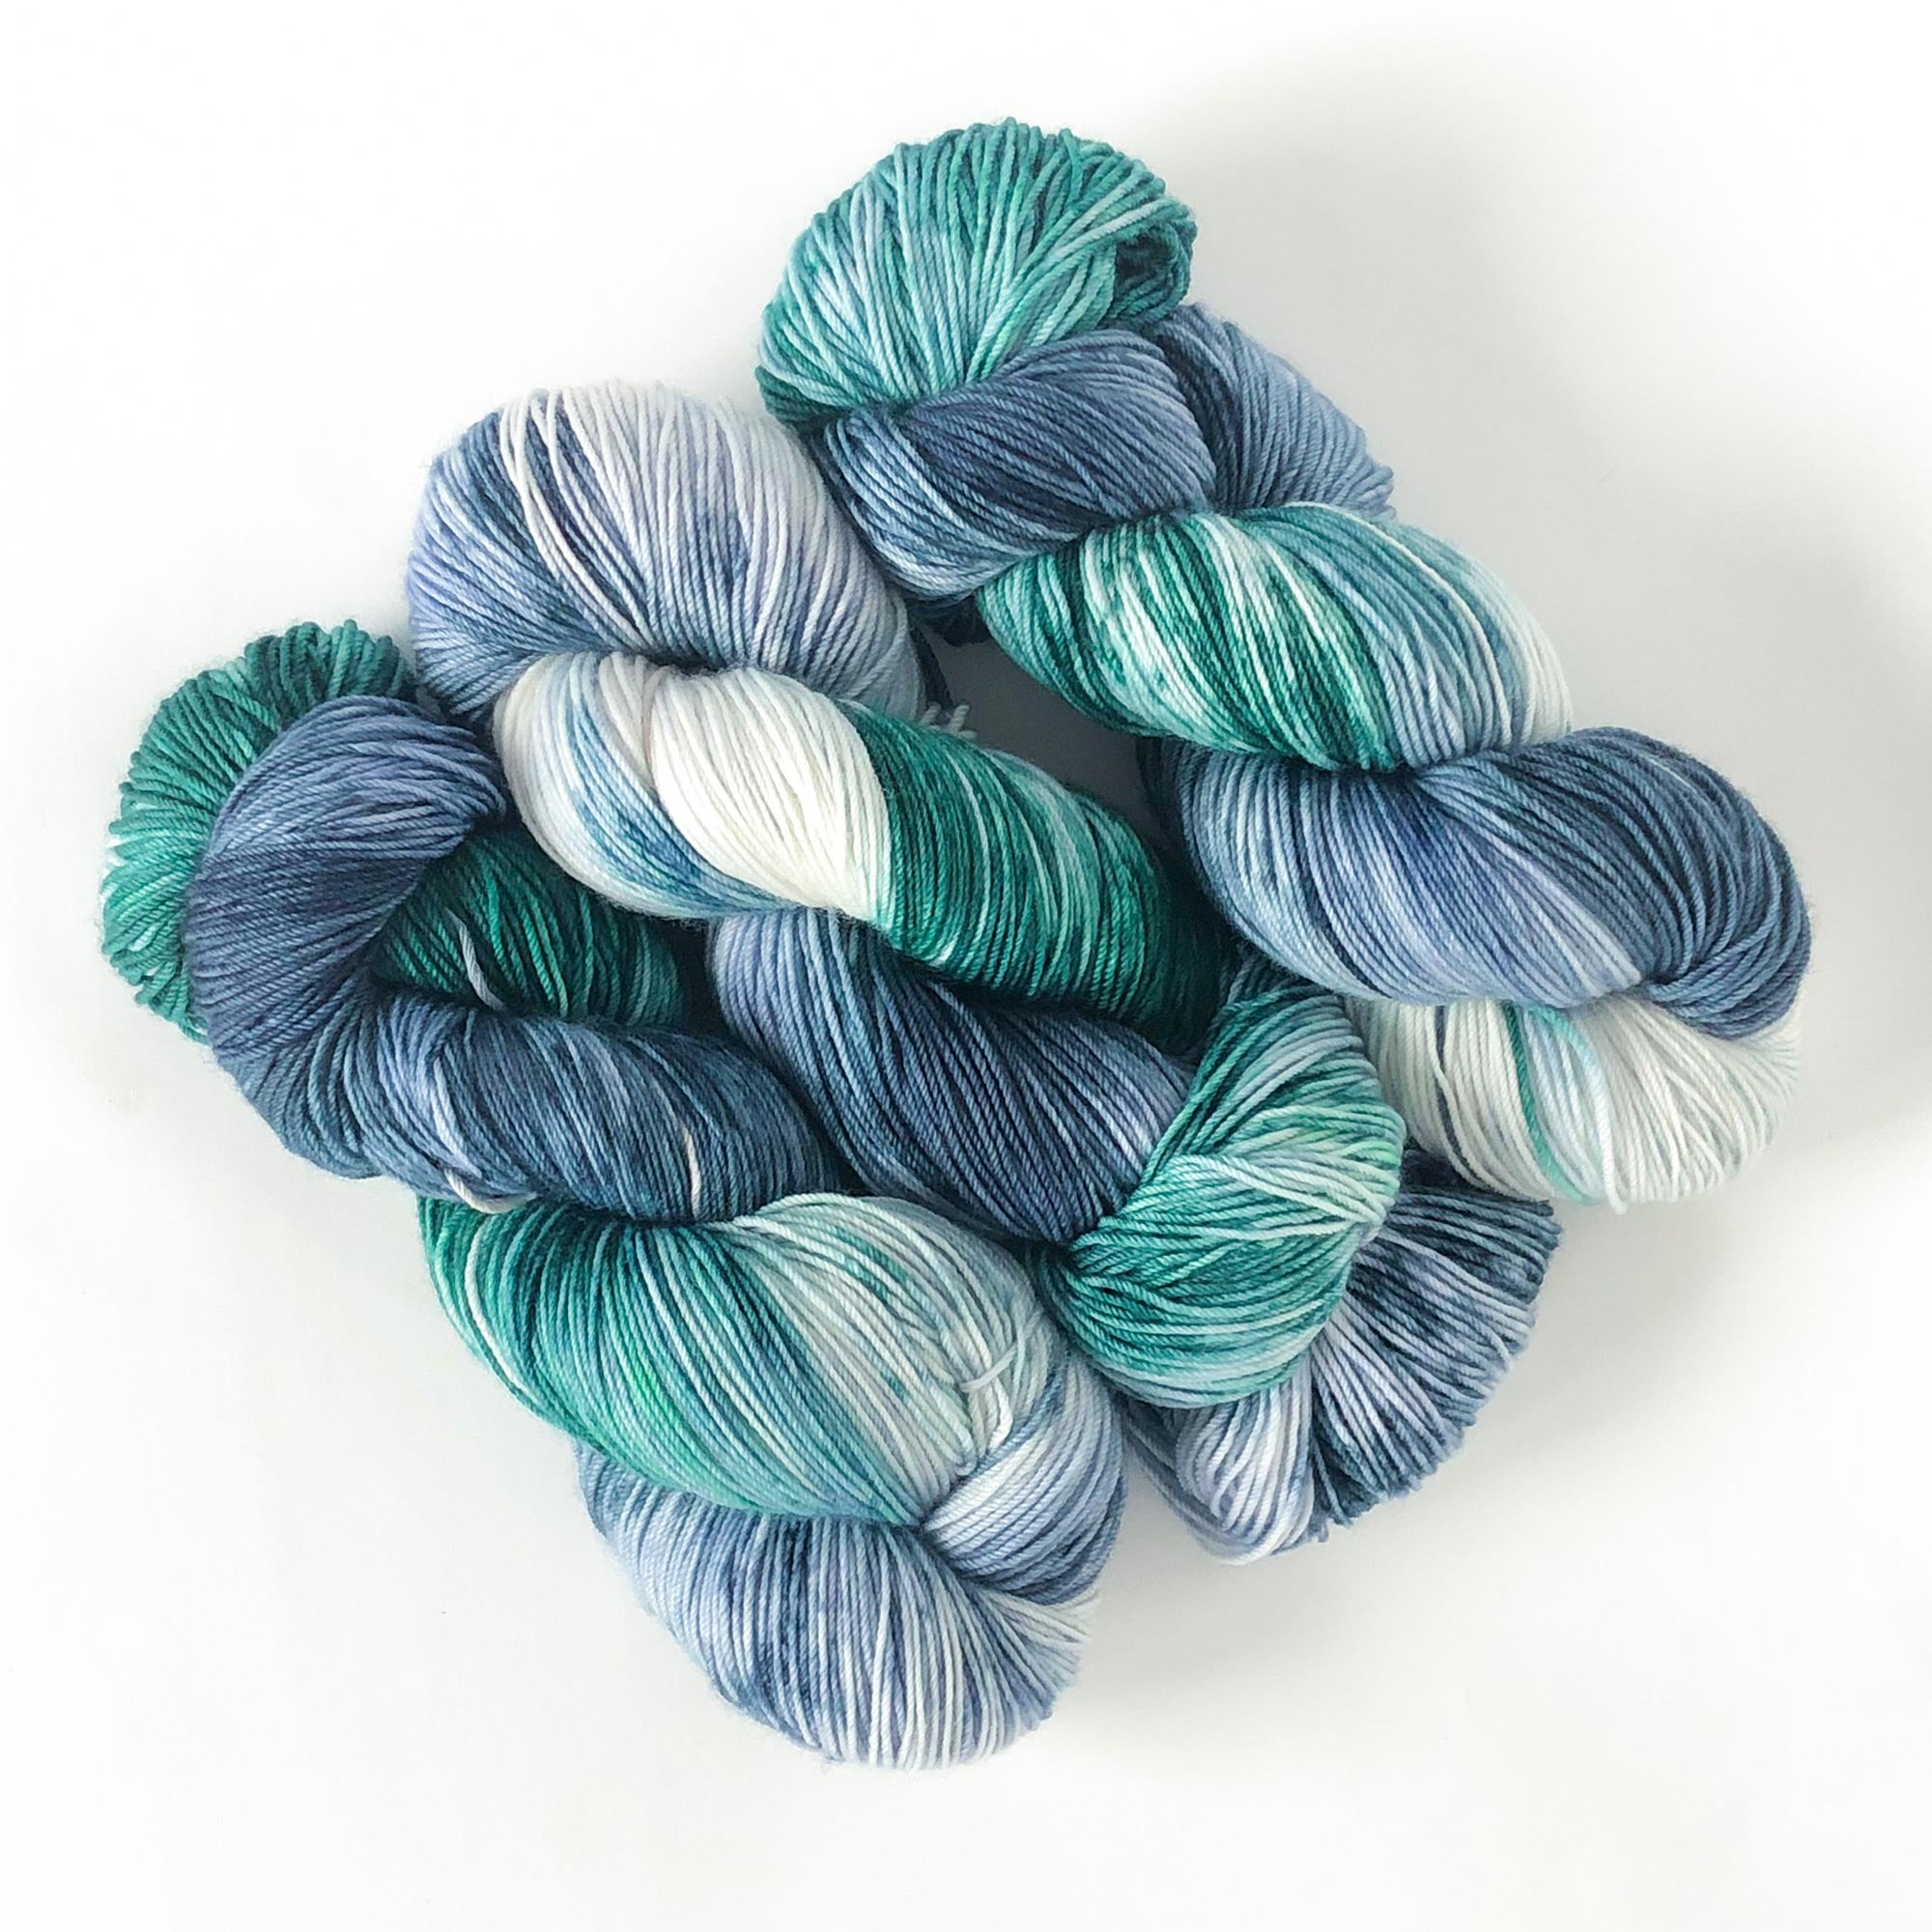 variegated artisan sock yarn in teal green and blue 